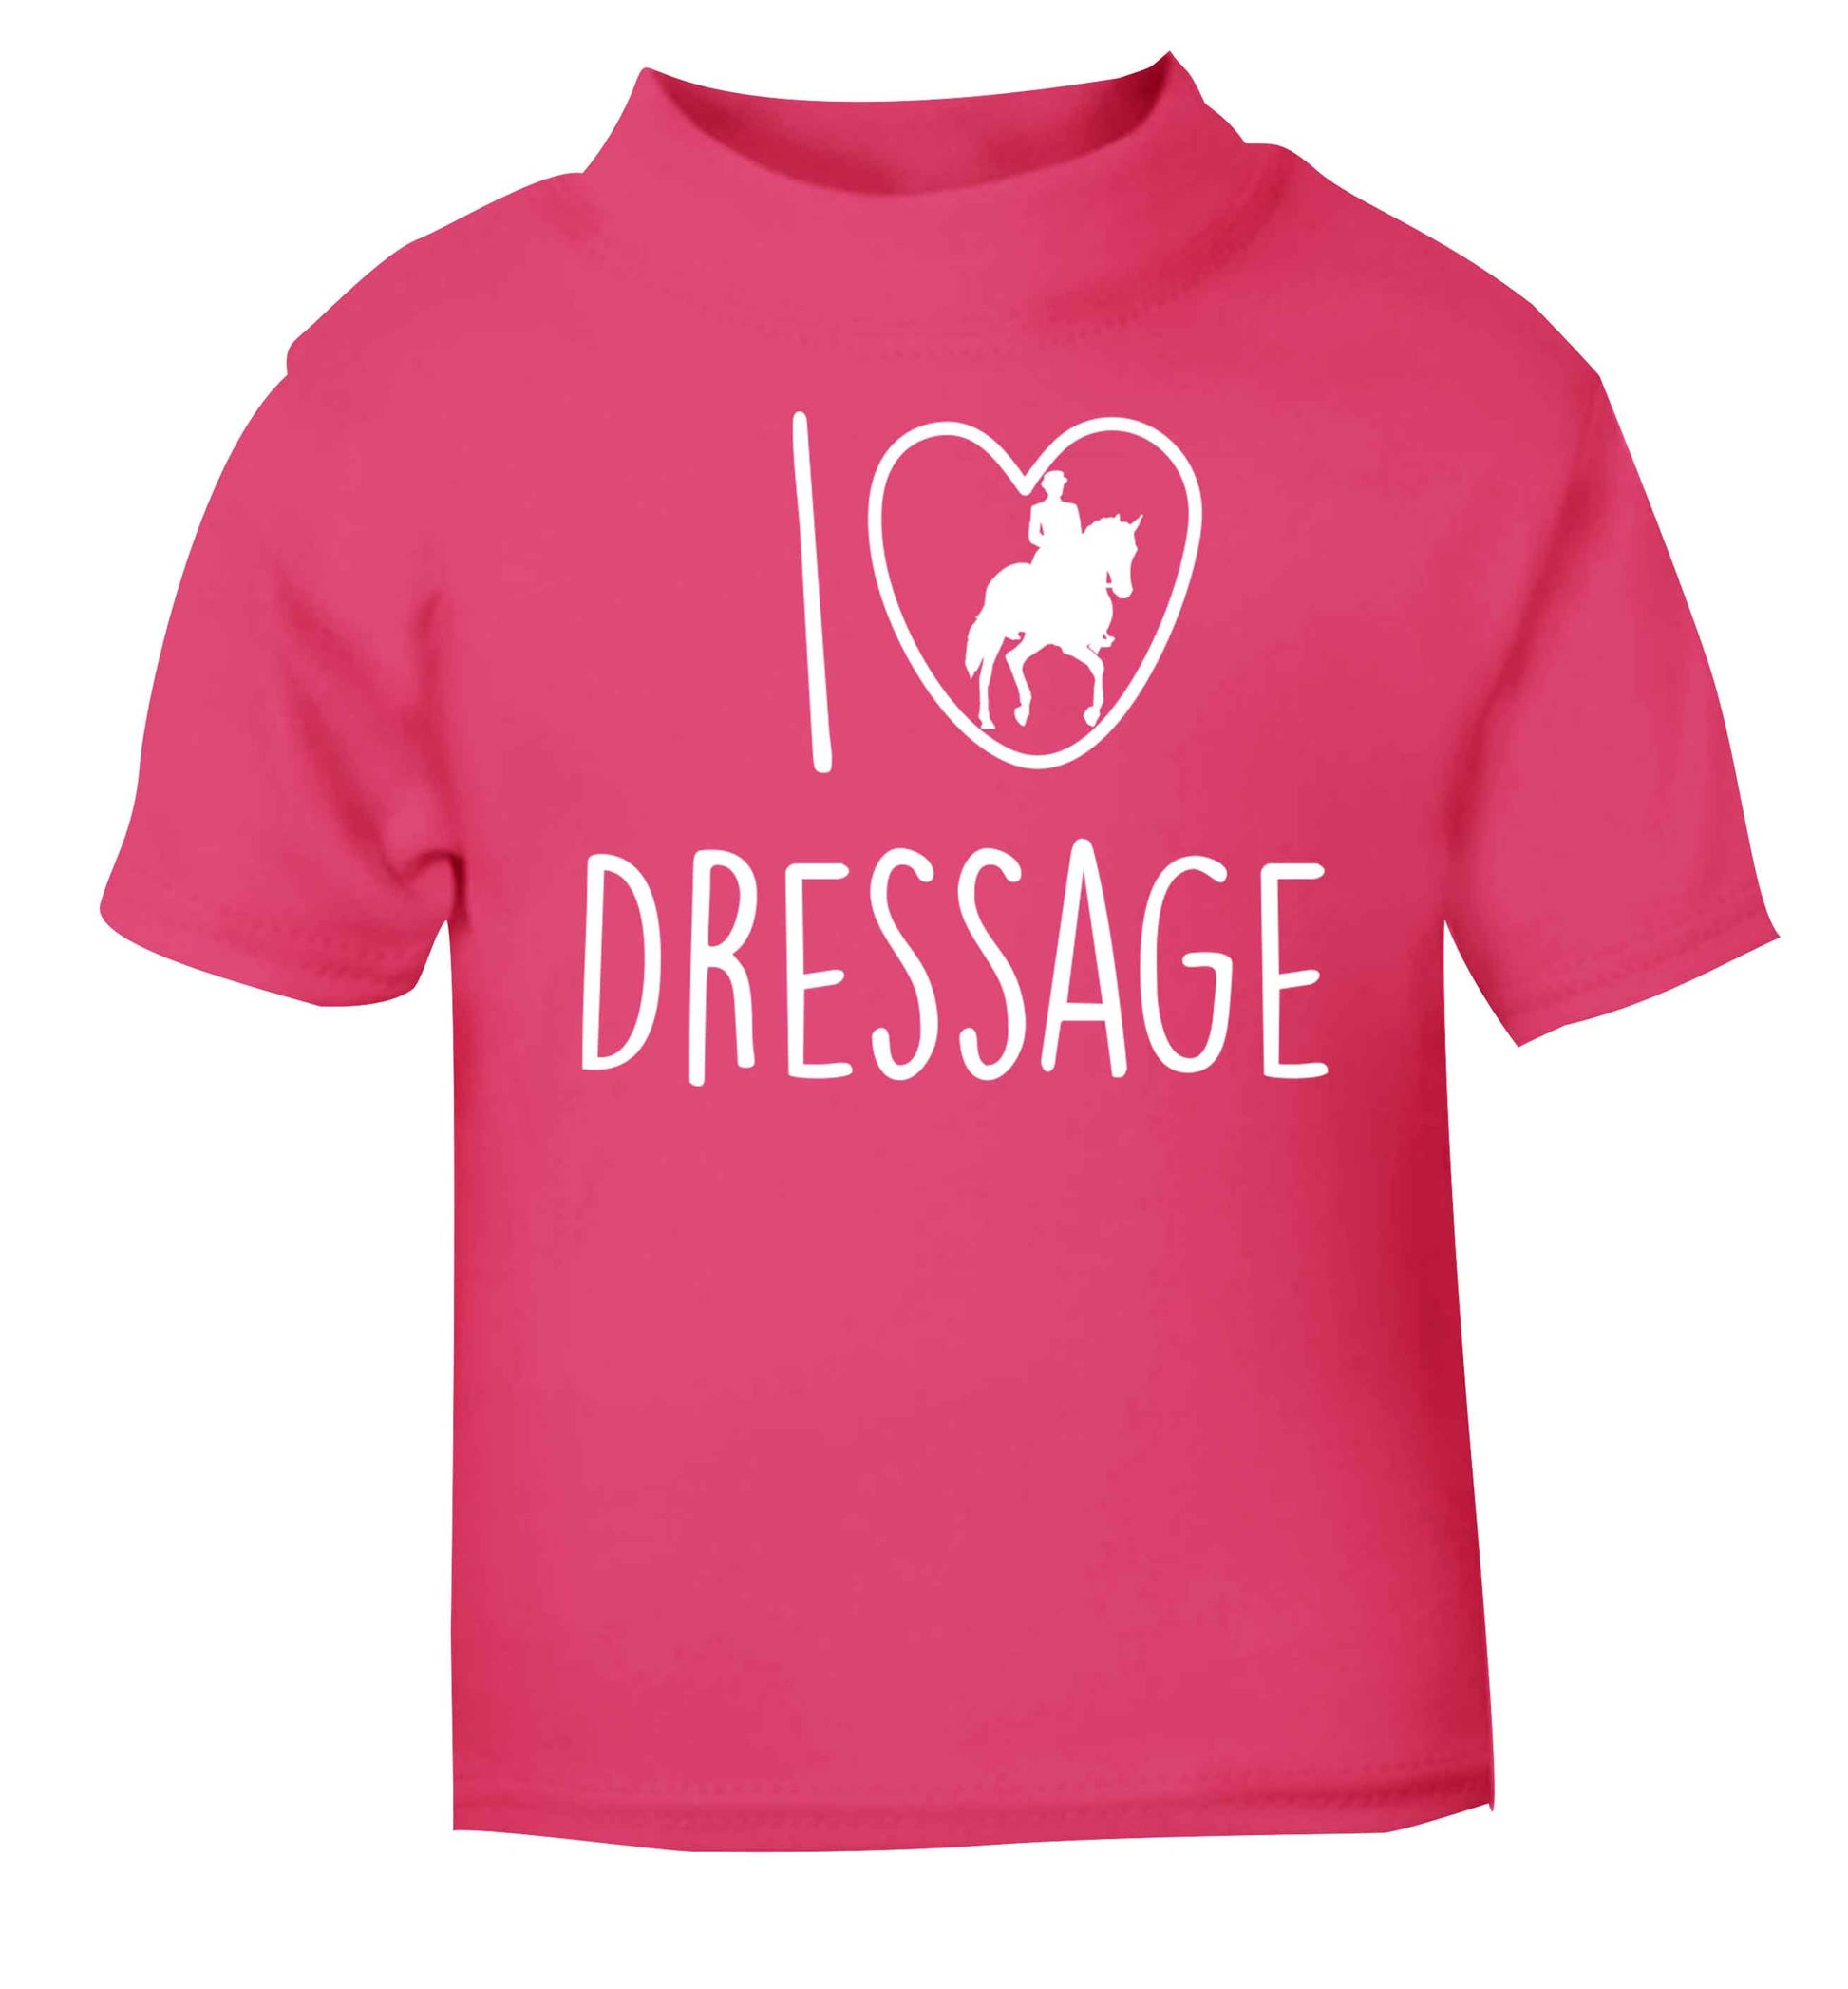 I love dressage pink baby toddler Tshirt 2 Years